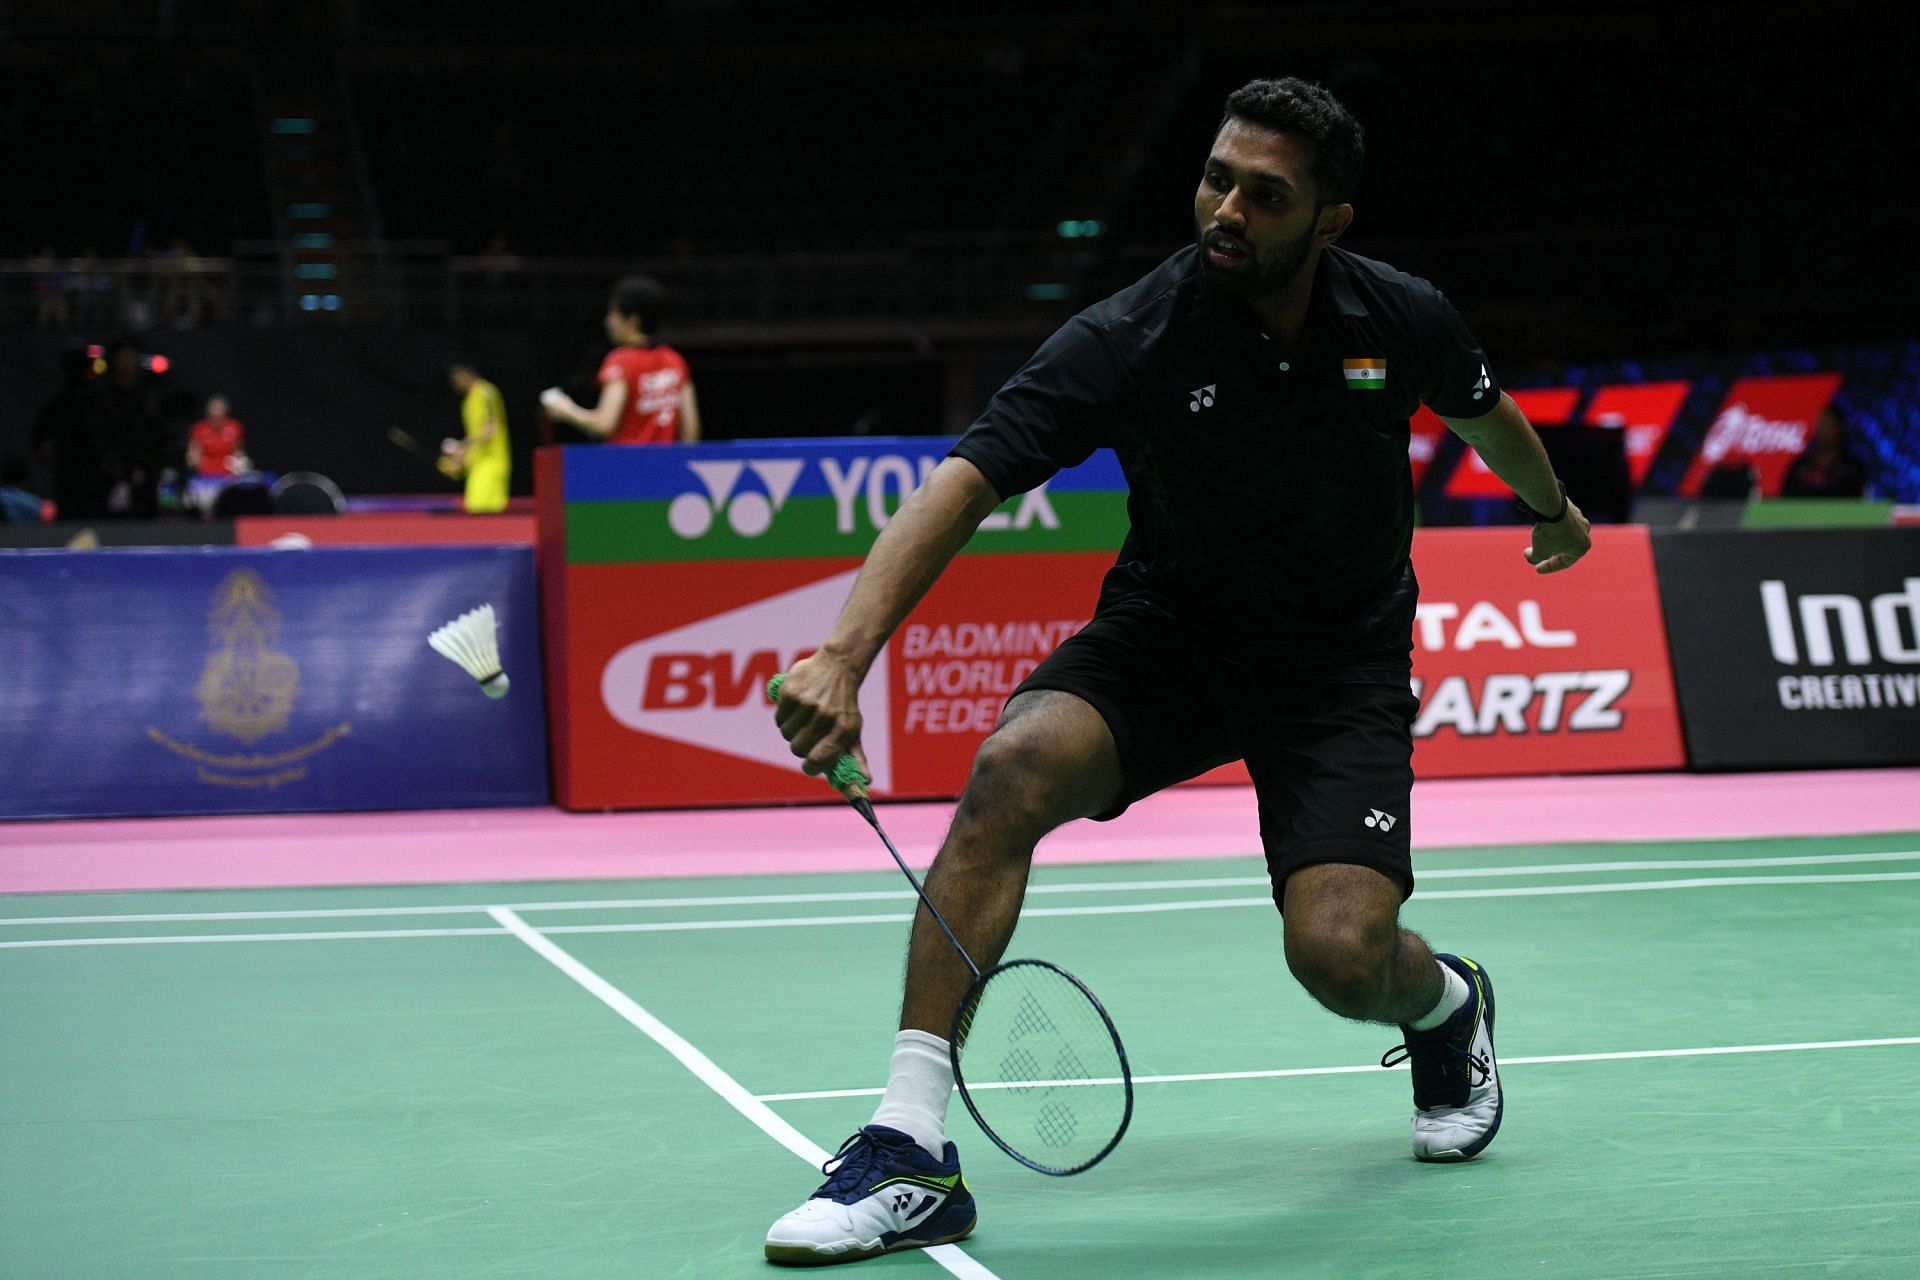 HS Prannoy in action during an earlier match. (Image: Getty)